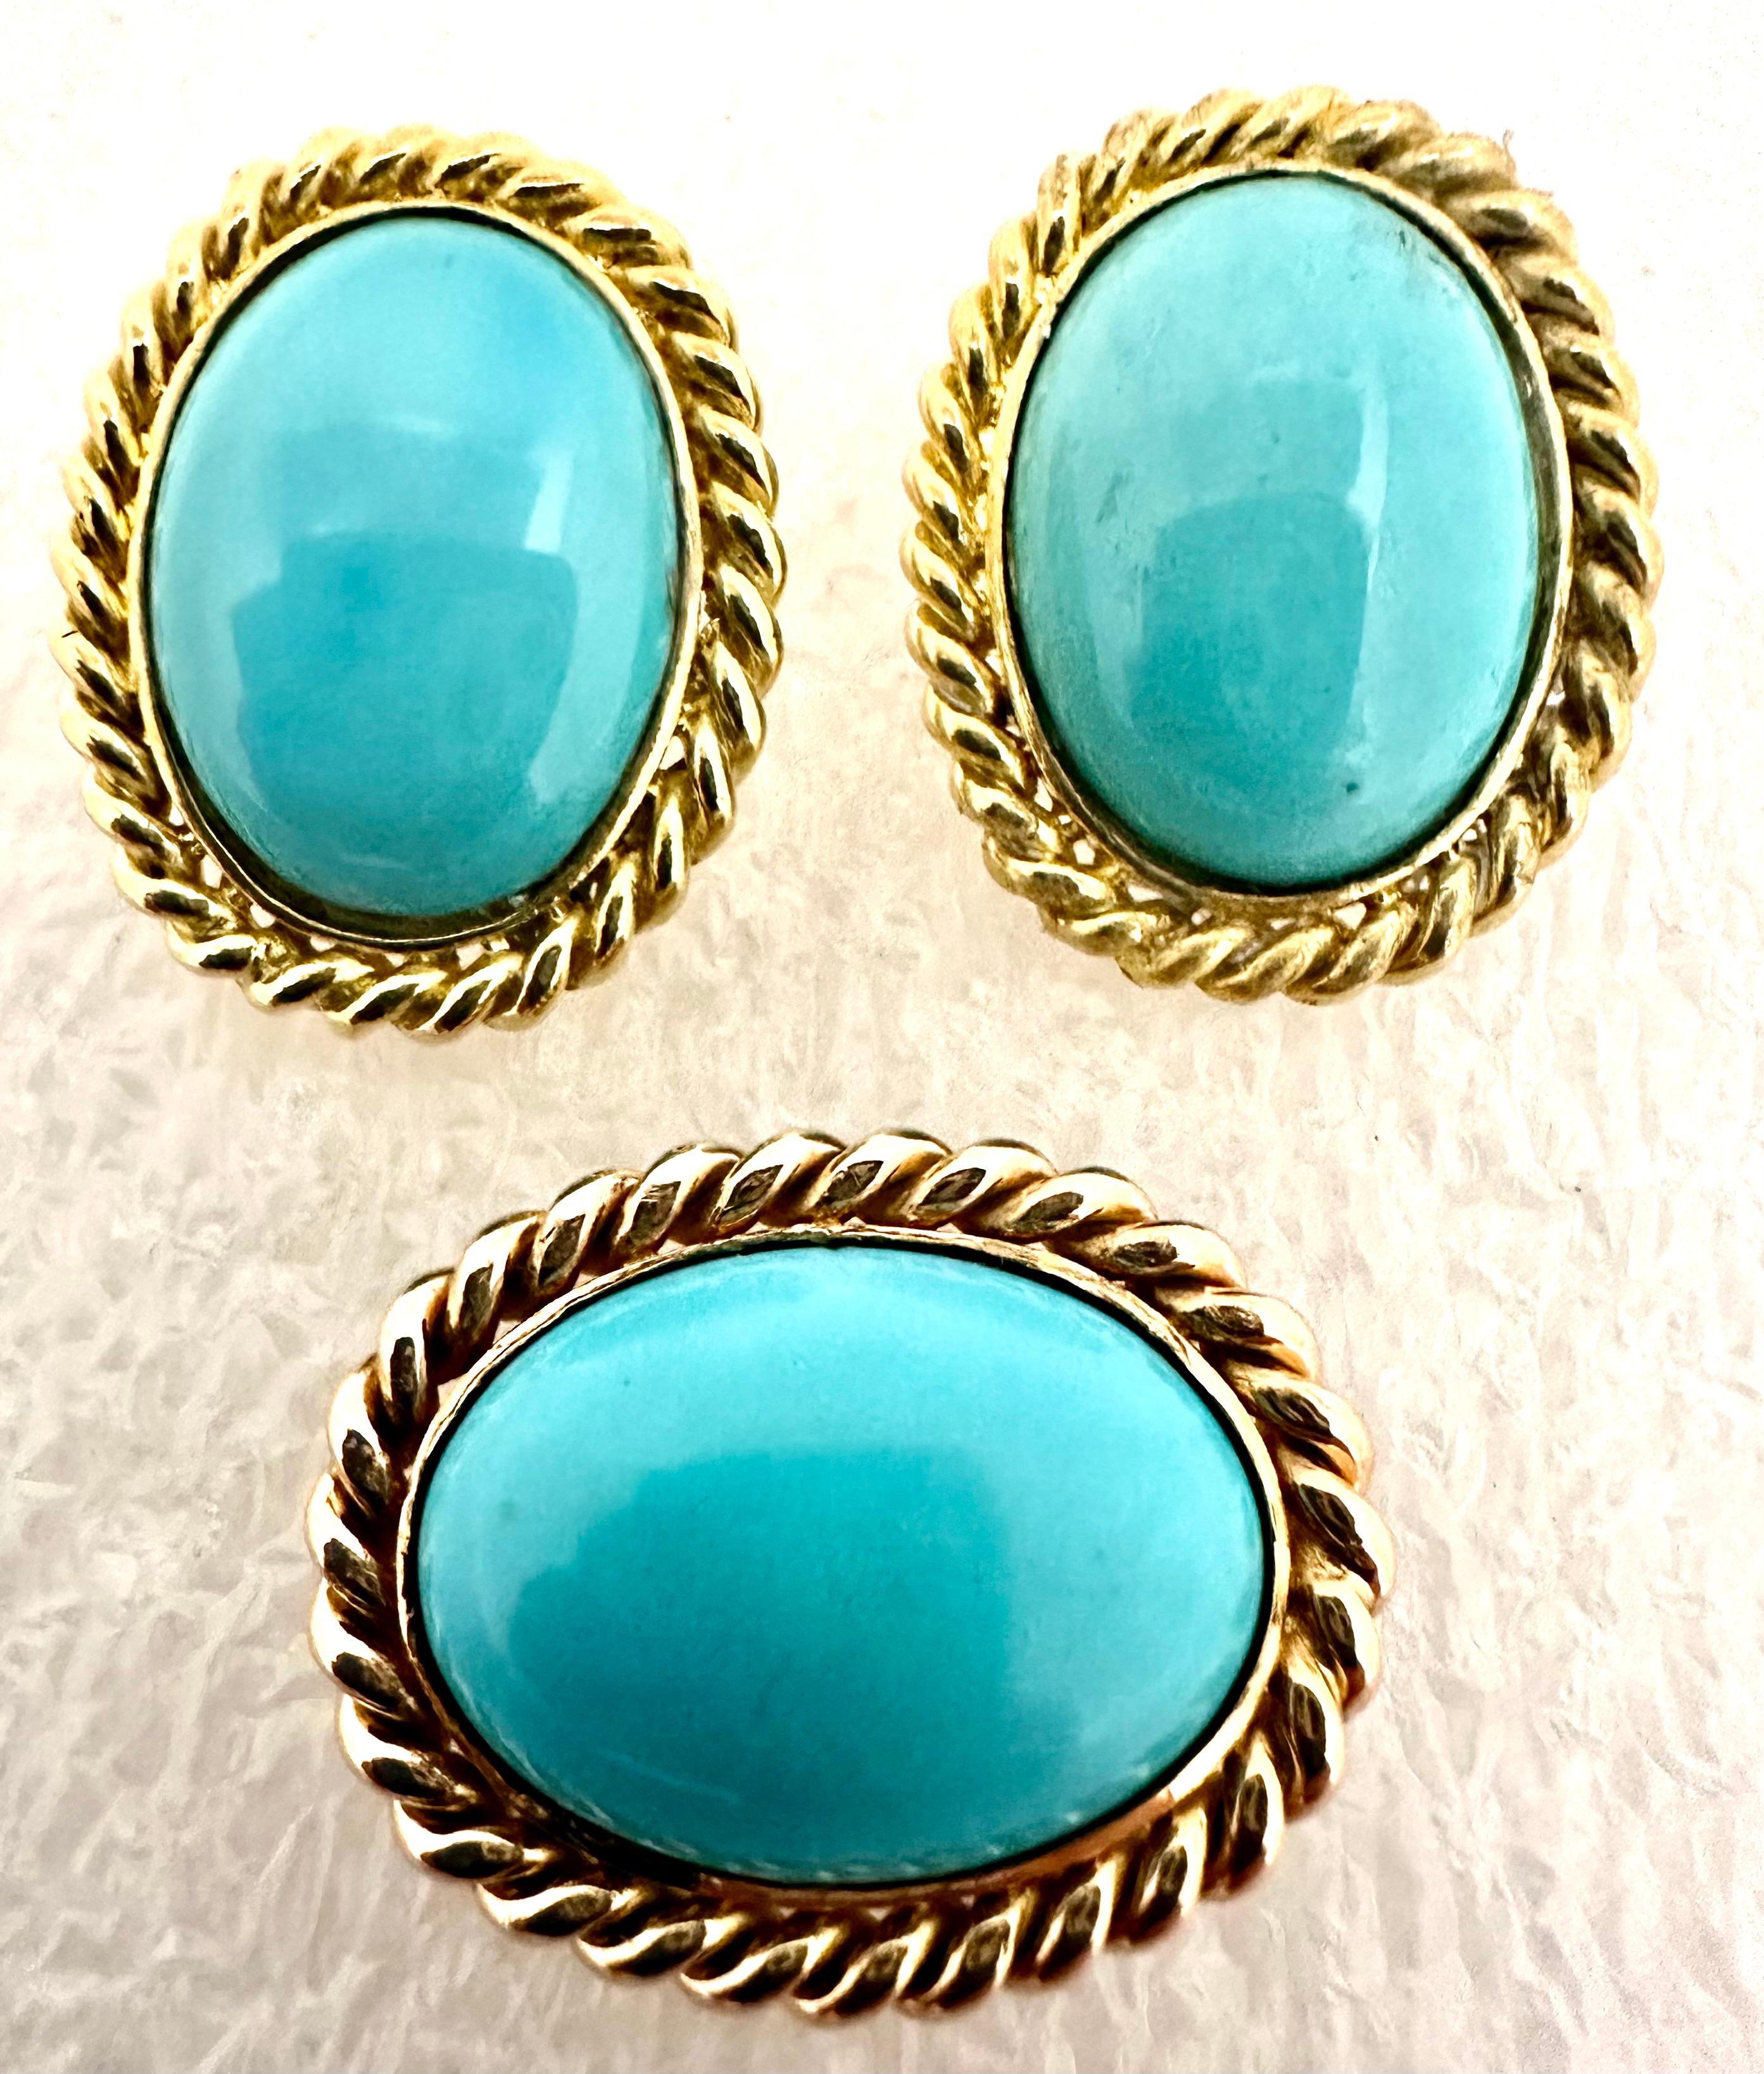 18kt Yellow Gold Persian Turquoise 16mm x 20mm Oval Earring & Pendant or Pin Set

Throughout the centuries, the intense sky-blue Iranian turquoise, known as “Persian turquoise,” has been the most sought after. This is a clear, even blue color with